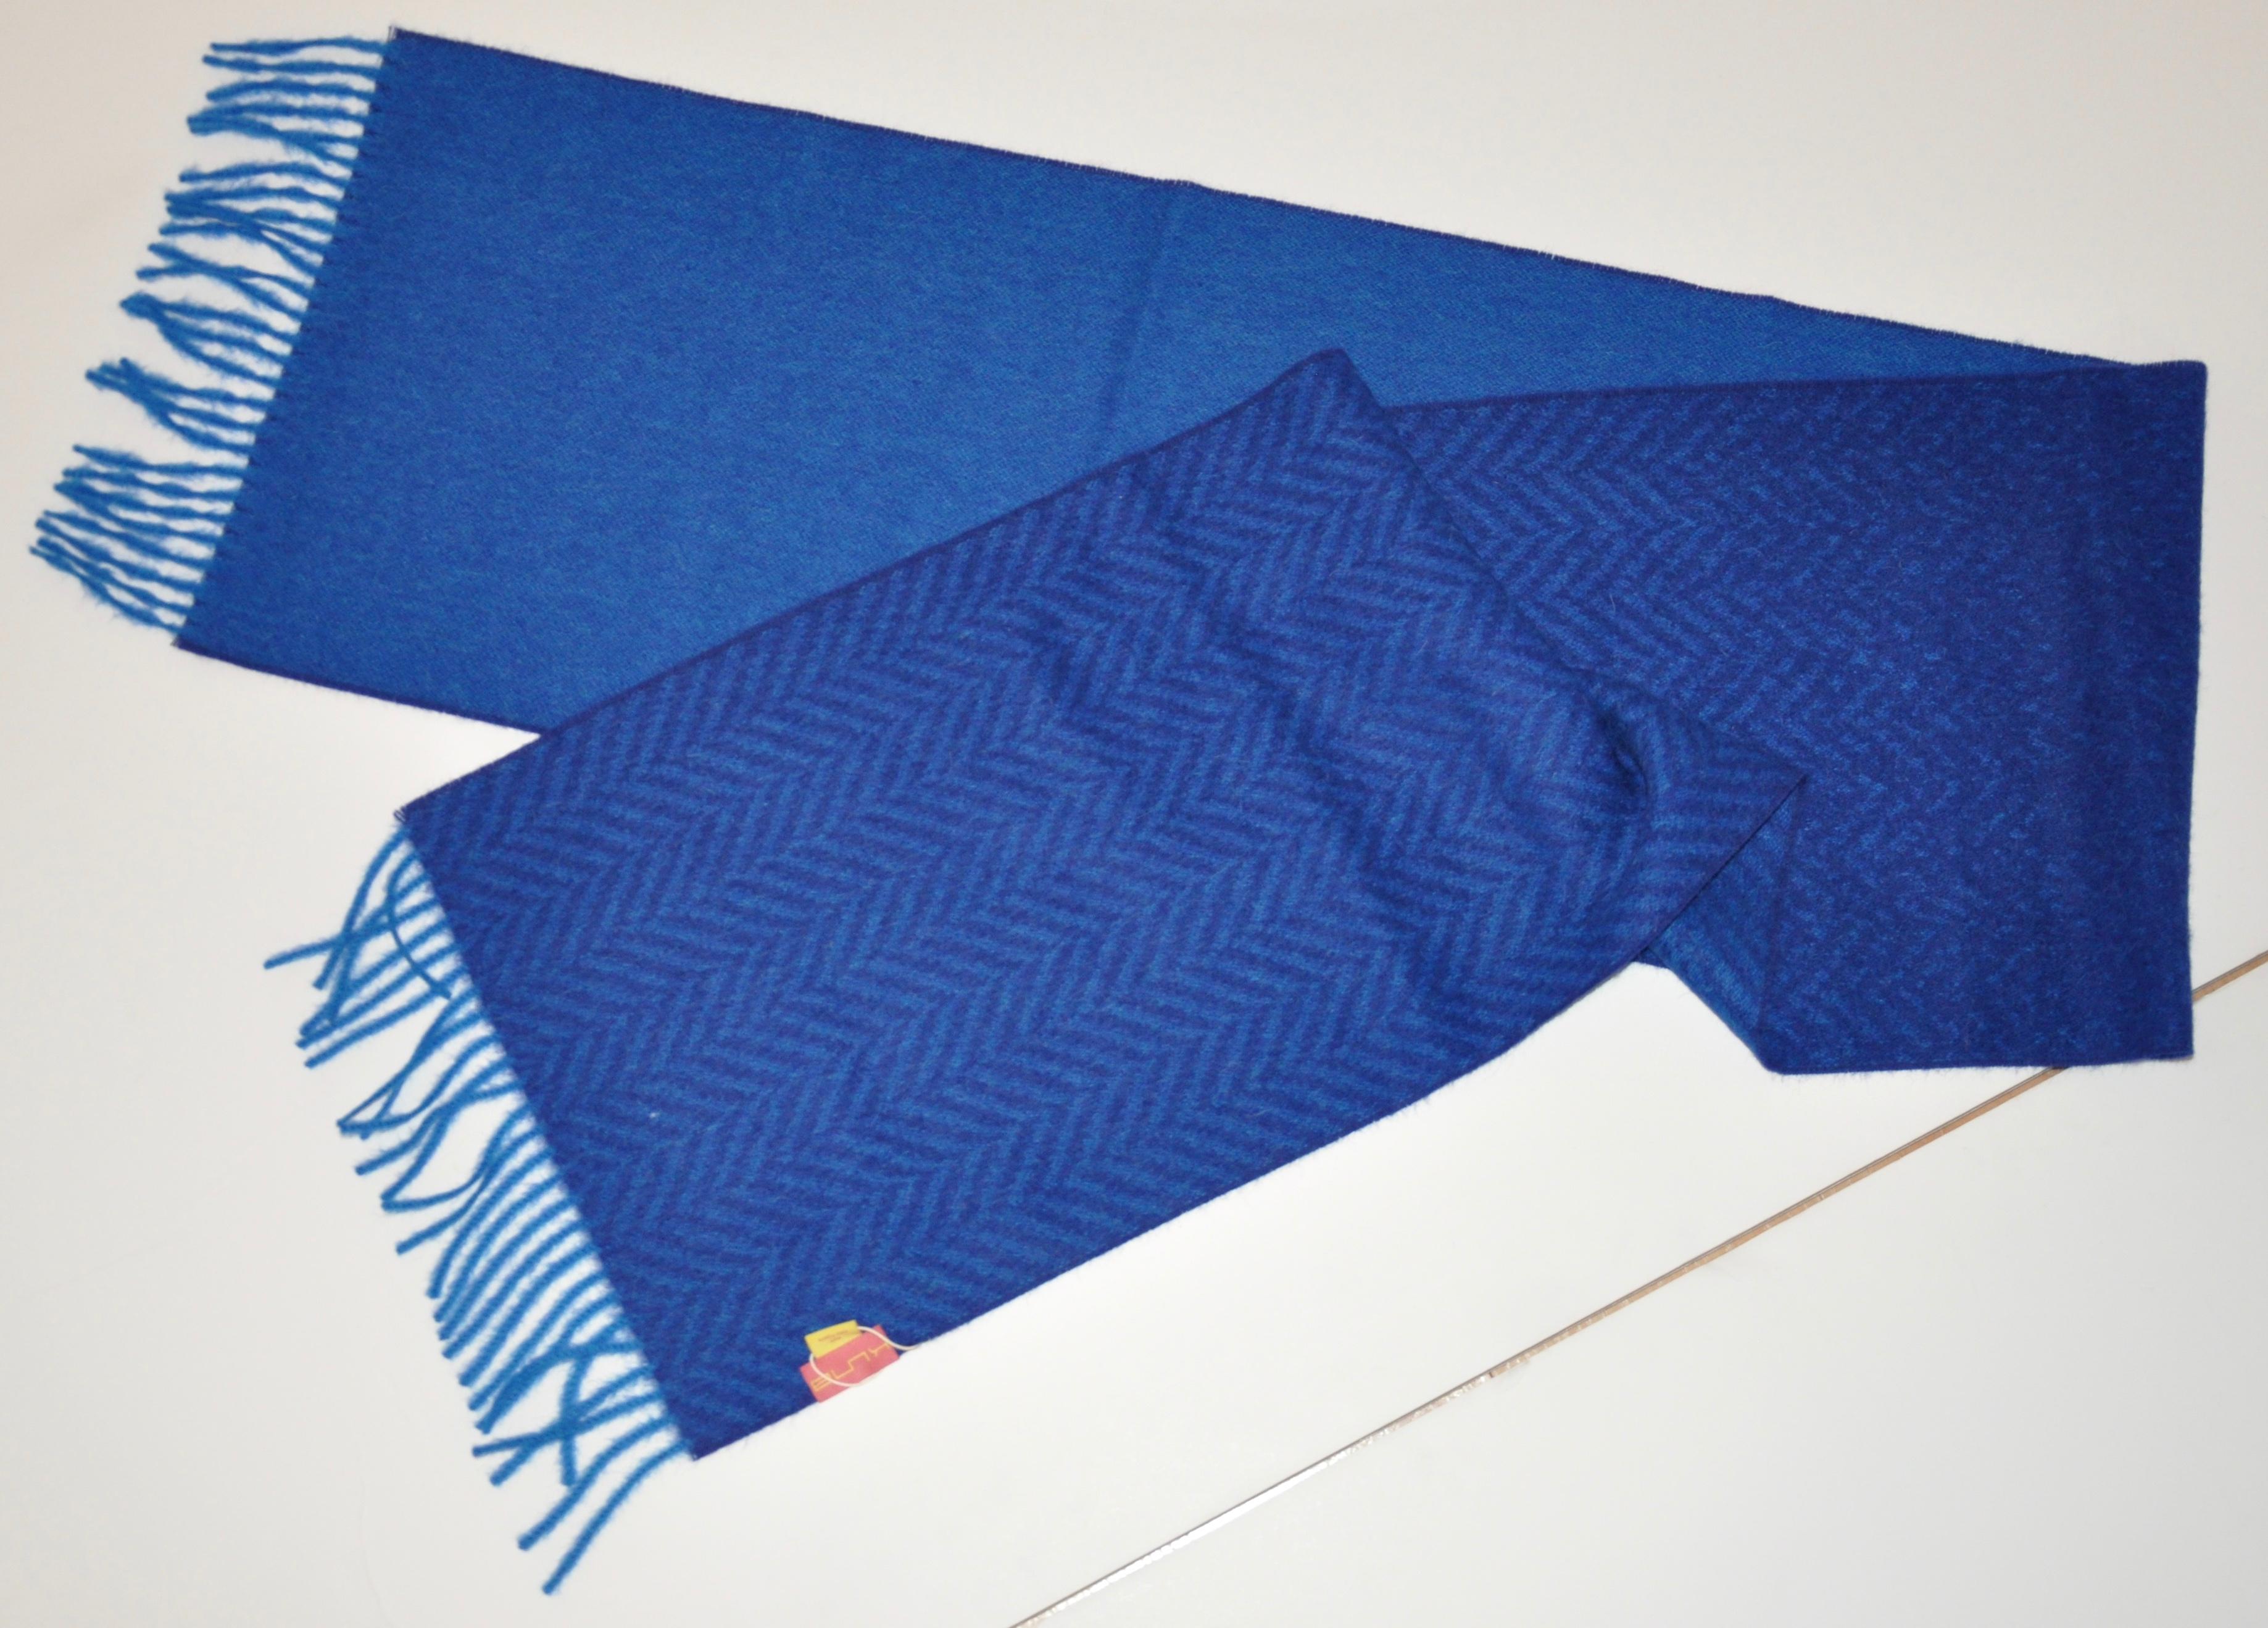      Shades of rich lapis-blue and herringbone-print baby alpaca fringed scarf measures 70 inches by 11 1/2 inches. Made in Peru.